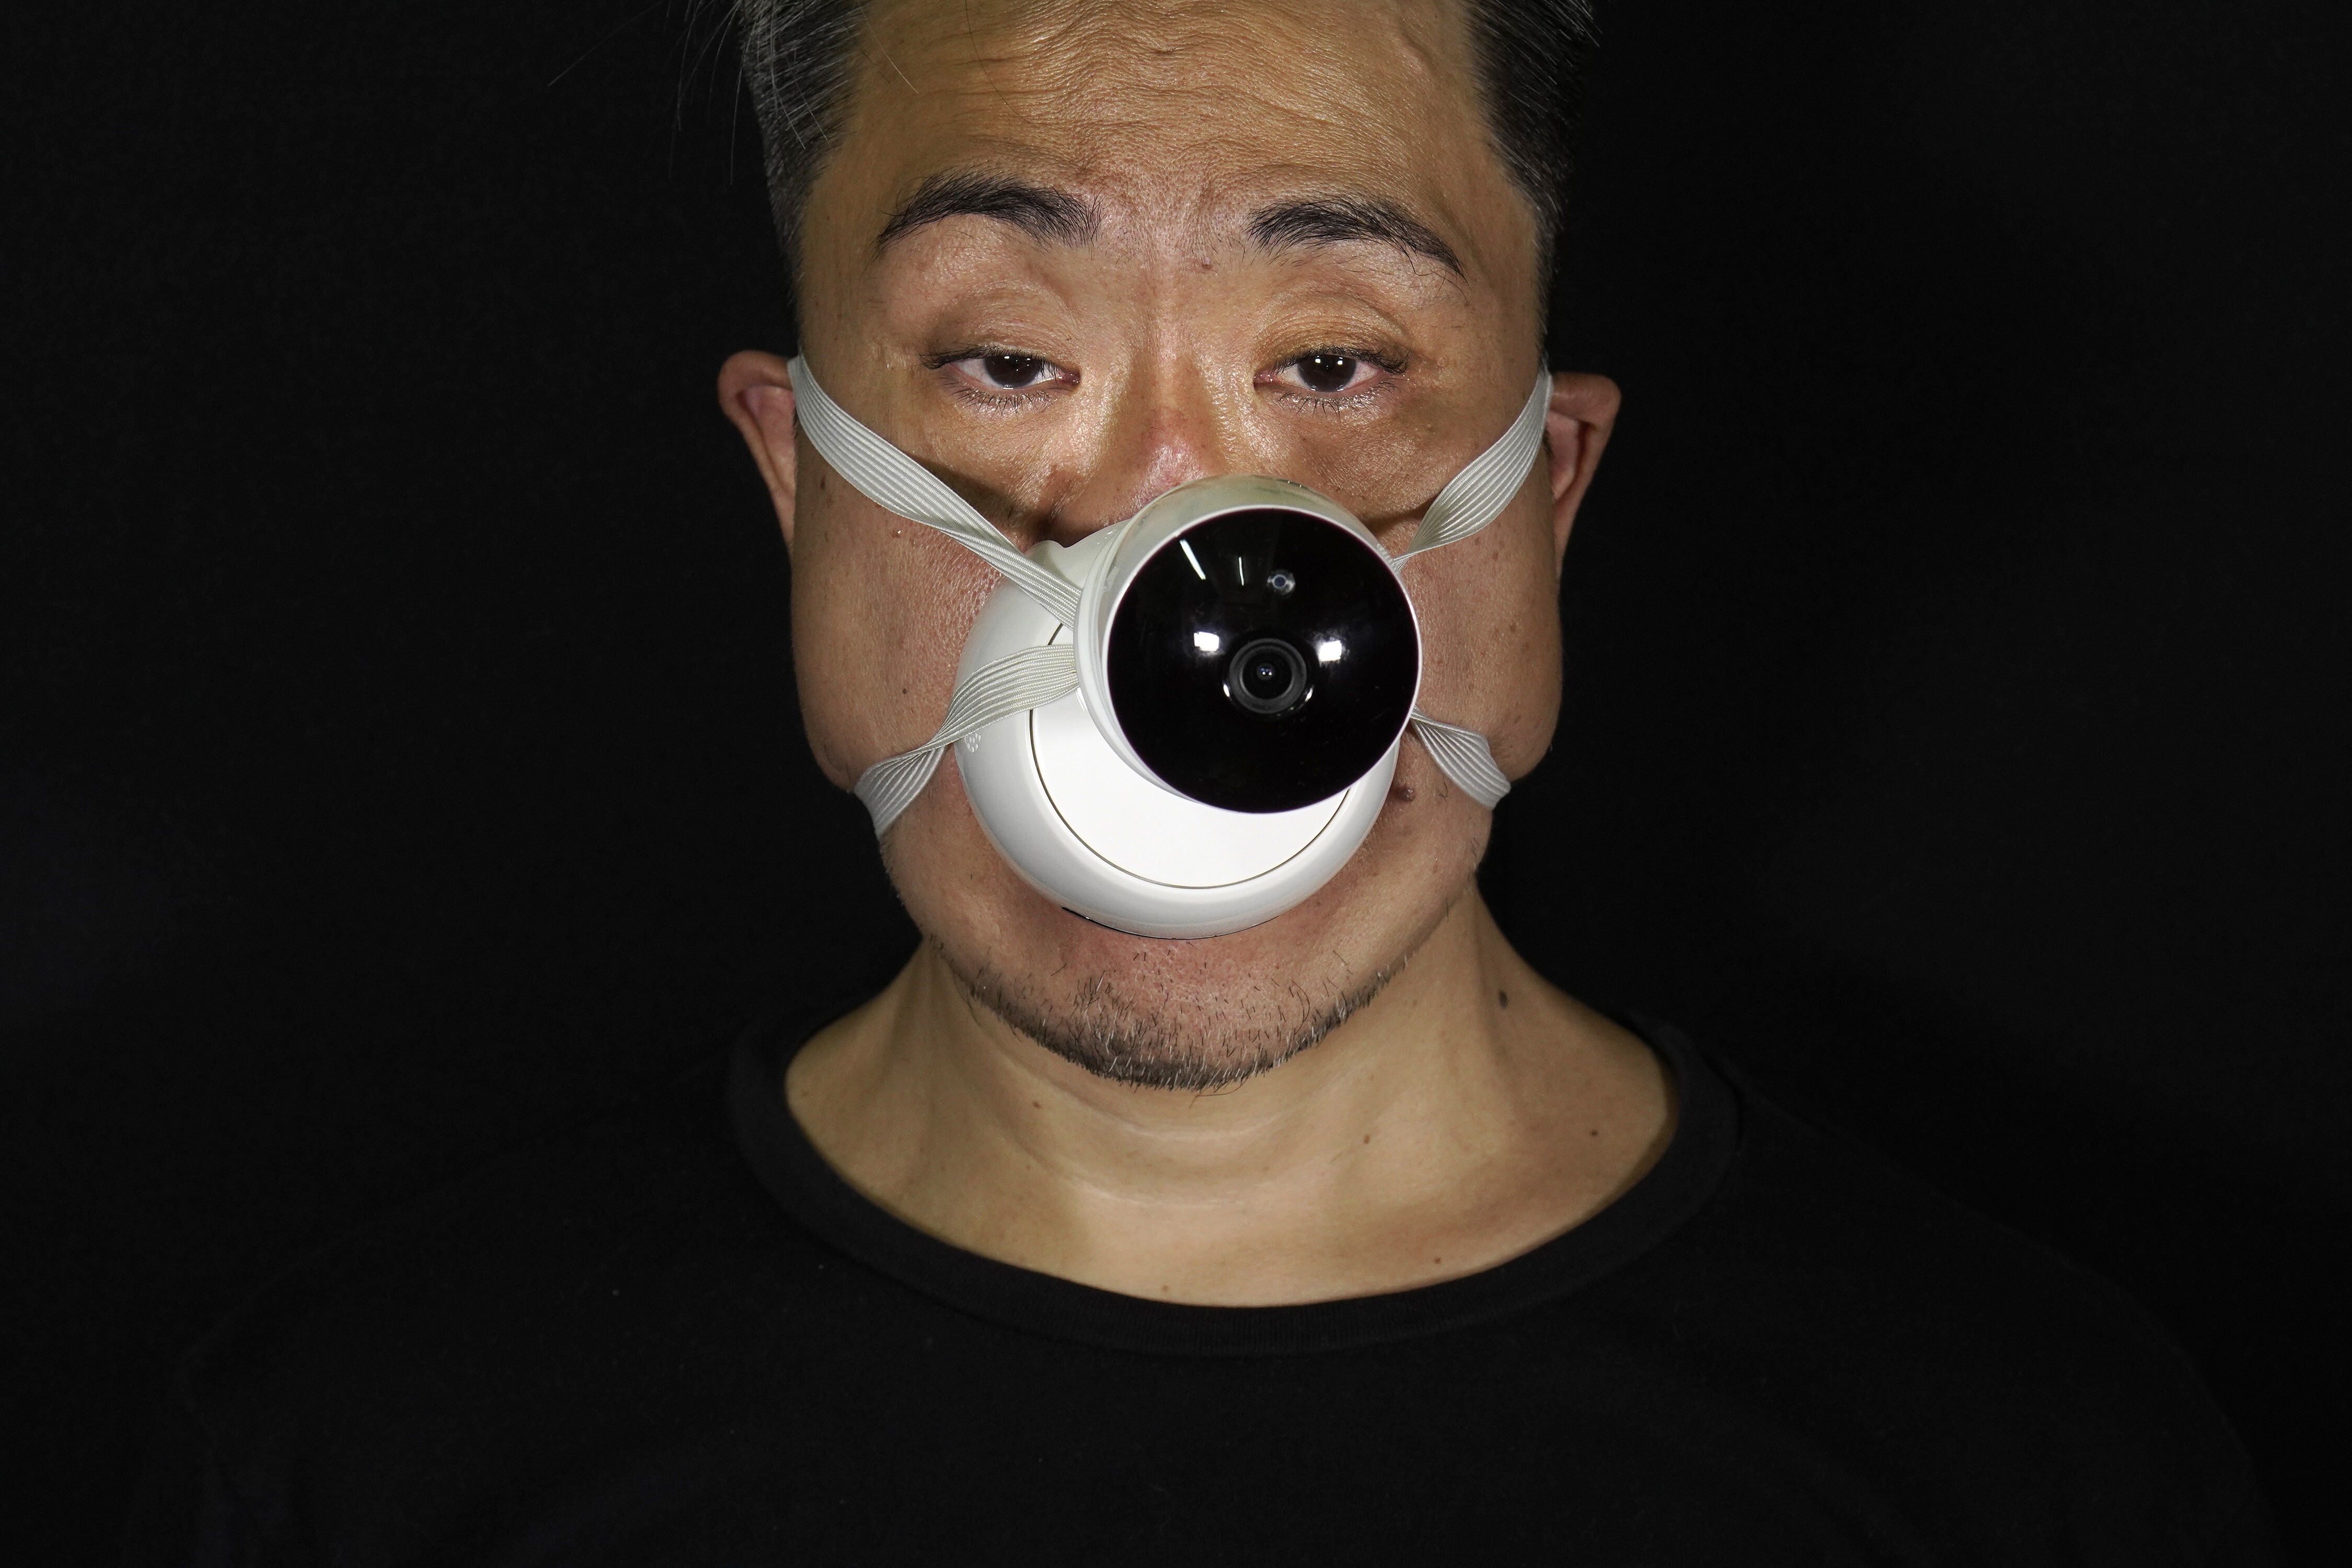 Edmond Kok models one of his face masks, with a design inspired by the now ubiquitous CCTV camera, a tool of public security and control. Photo: AP